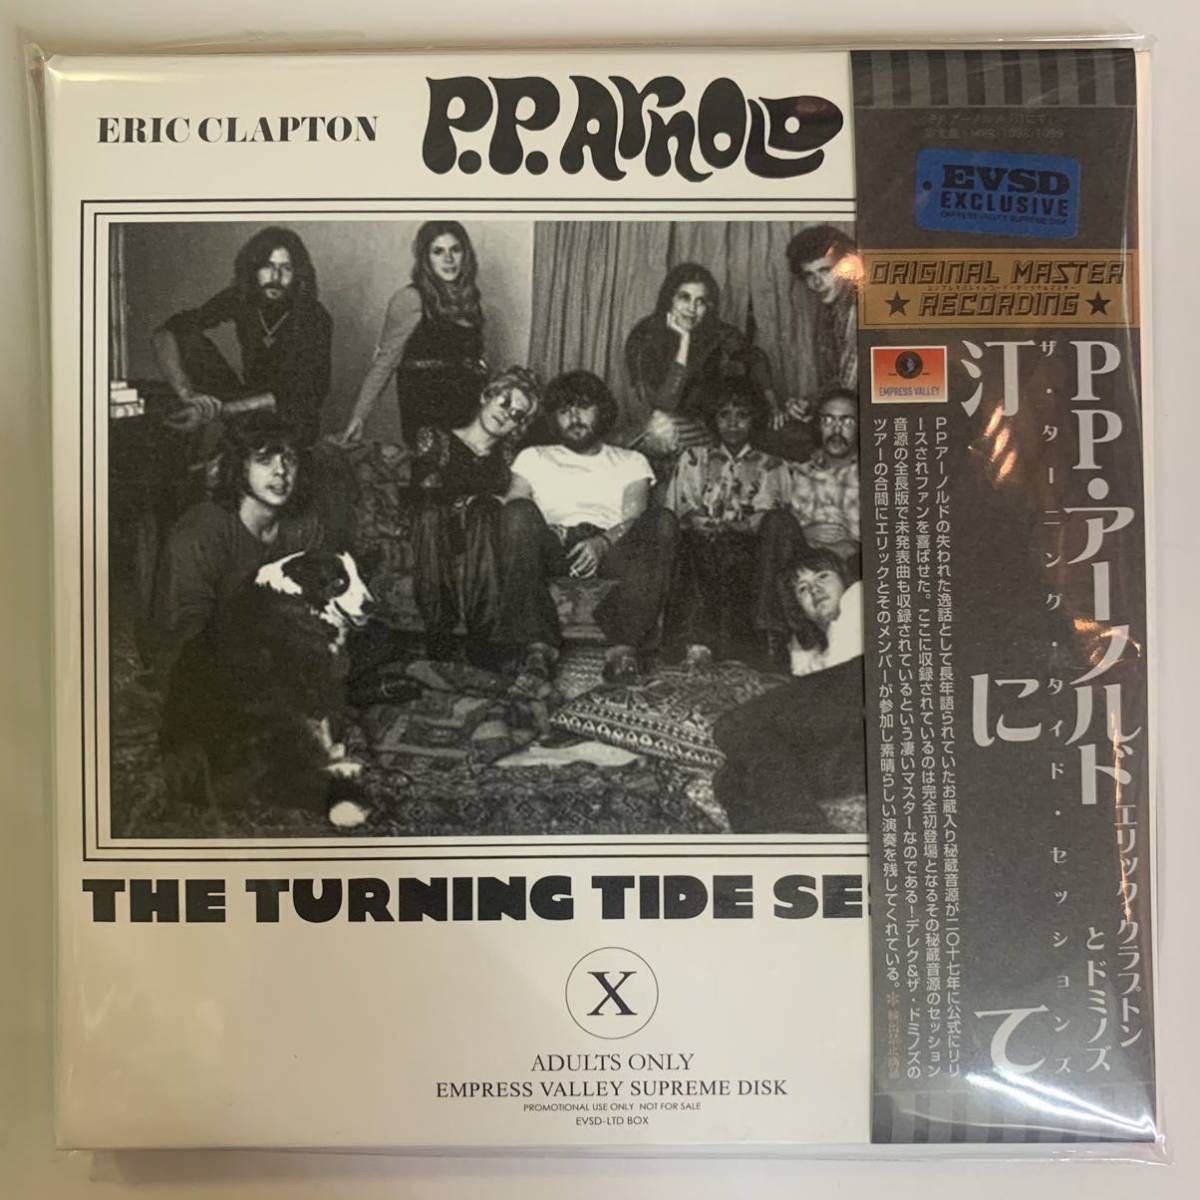 P.P. ARNOLD ERIC CLAPTON DEREK & THE DOMINOS / THE TURNING TIDE 